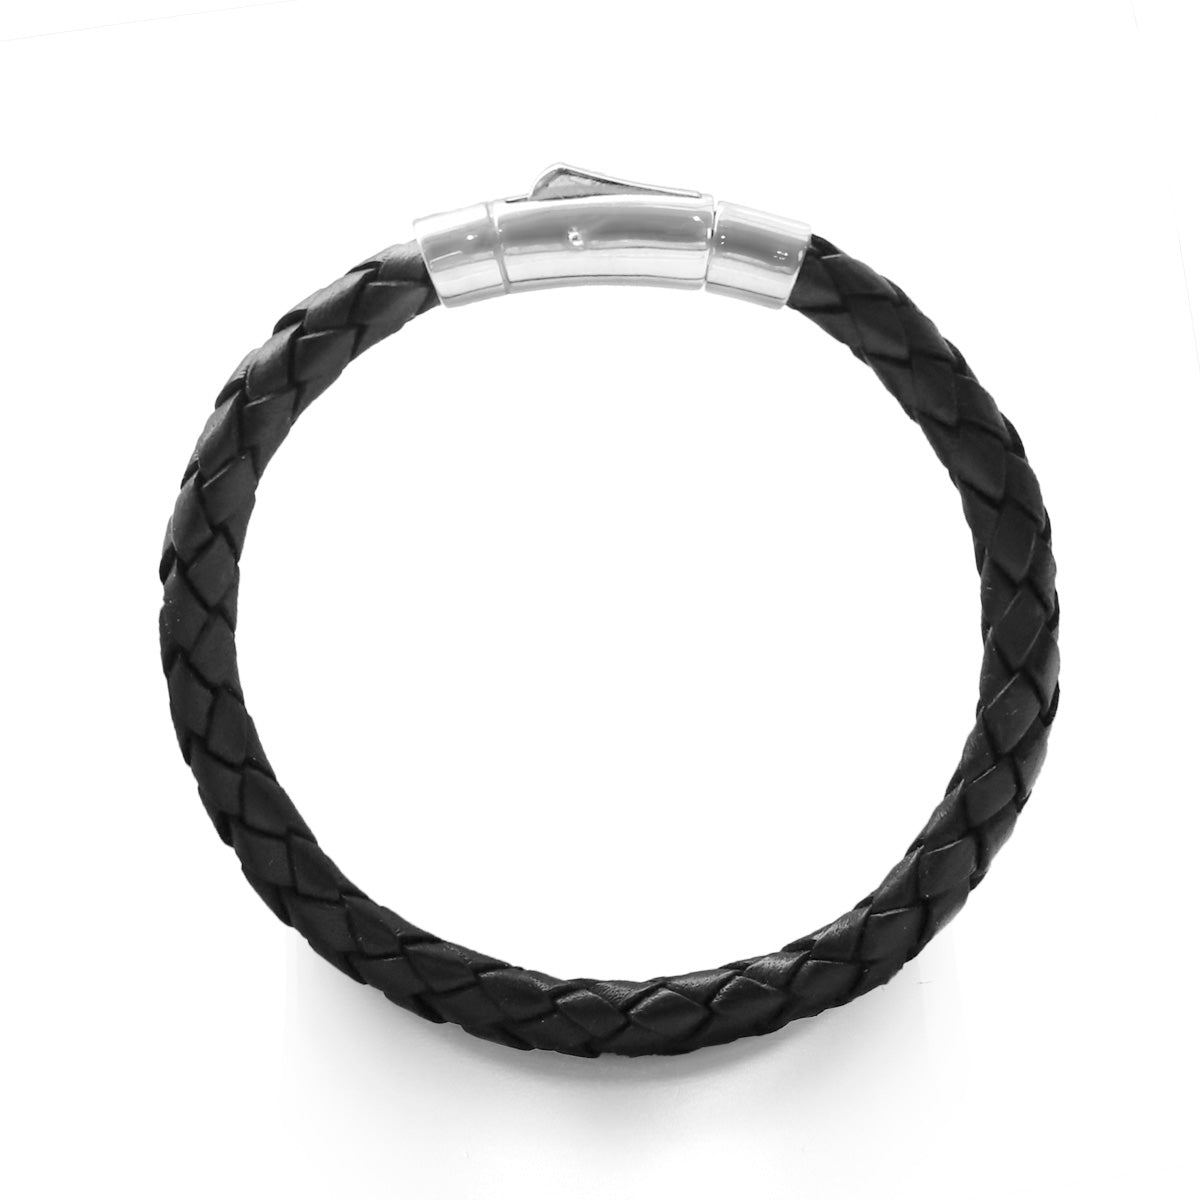 Leather Bracelet with Silver Hallmarked Clasp | Hersey & Son Silversmiths